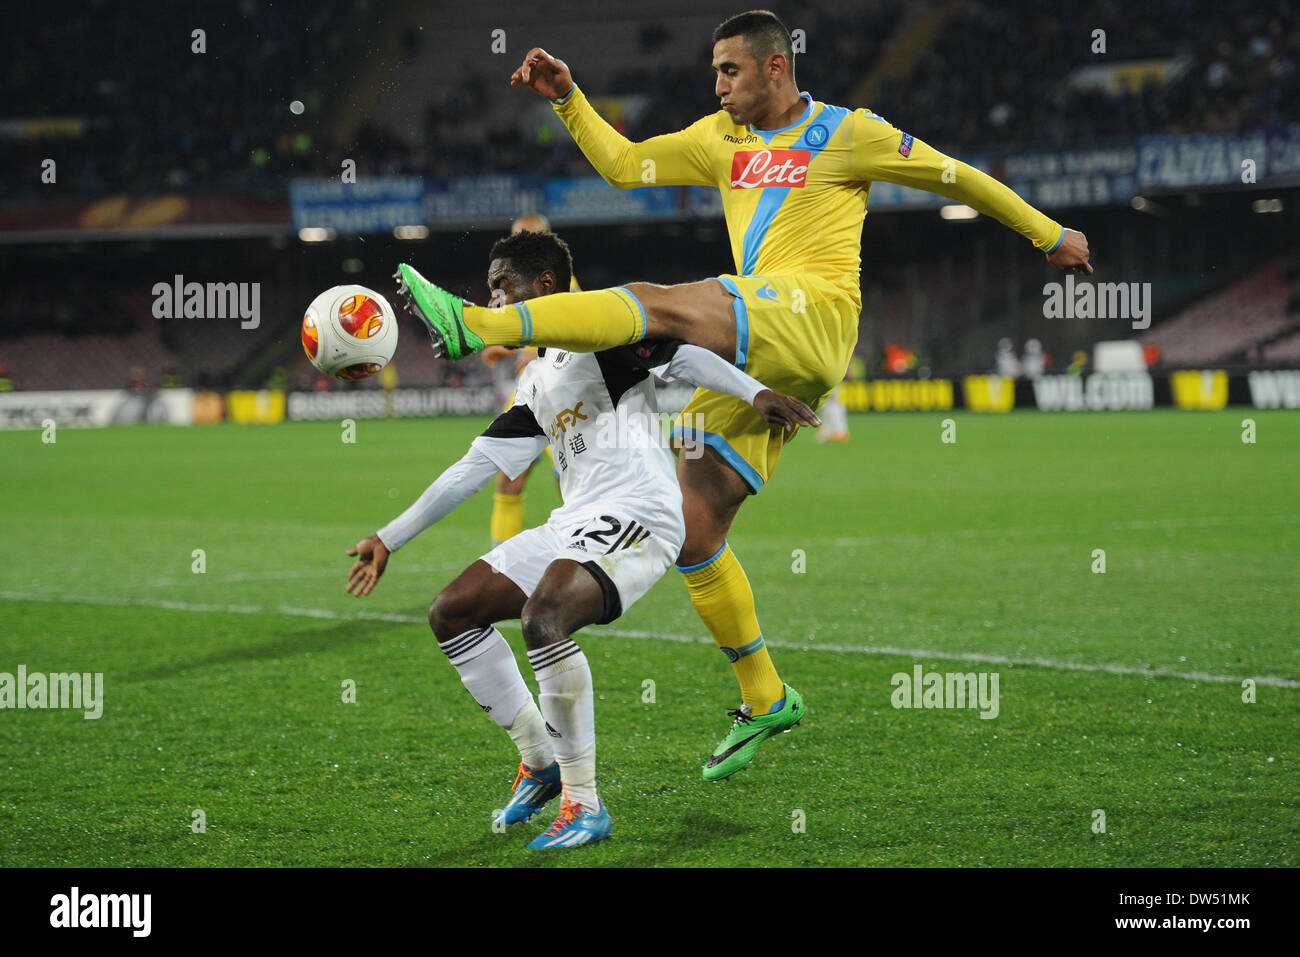 Faouzi Ghoulam Chalenges Nathan Dyer during the UEFA Europa League Round of 32 Second Leg match between SSC Napoli and Swansea City  Football / Soccer at Stadio San Paolo on February 27, 2014 in Naples, Italy. (Photo Franco Romano) Stock Photo